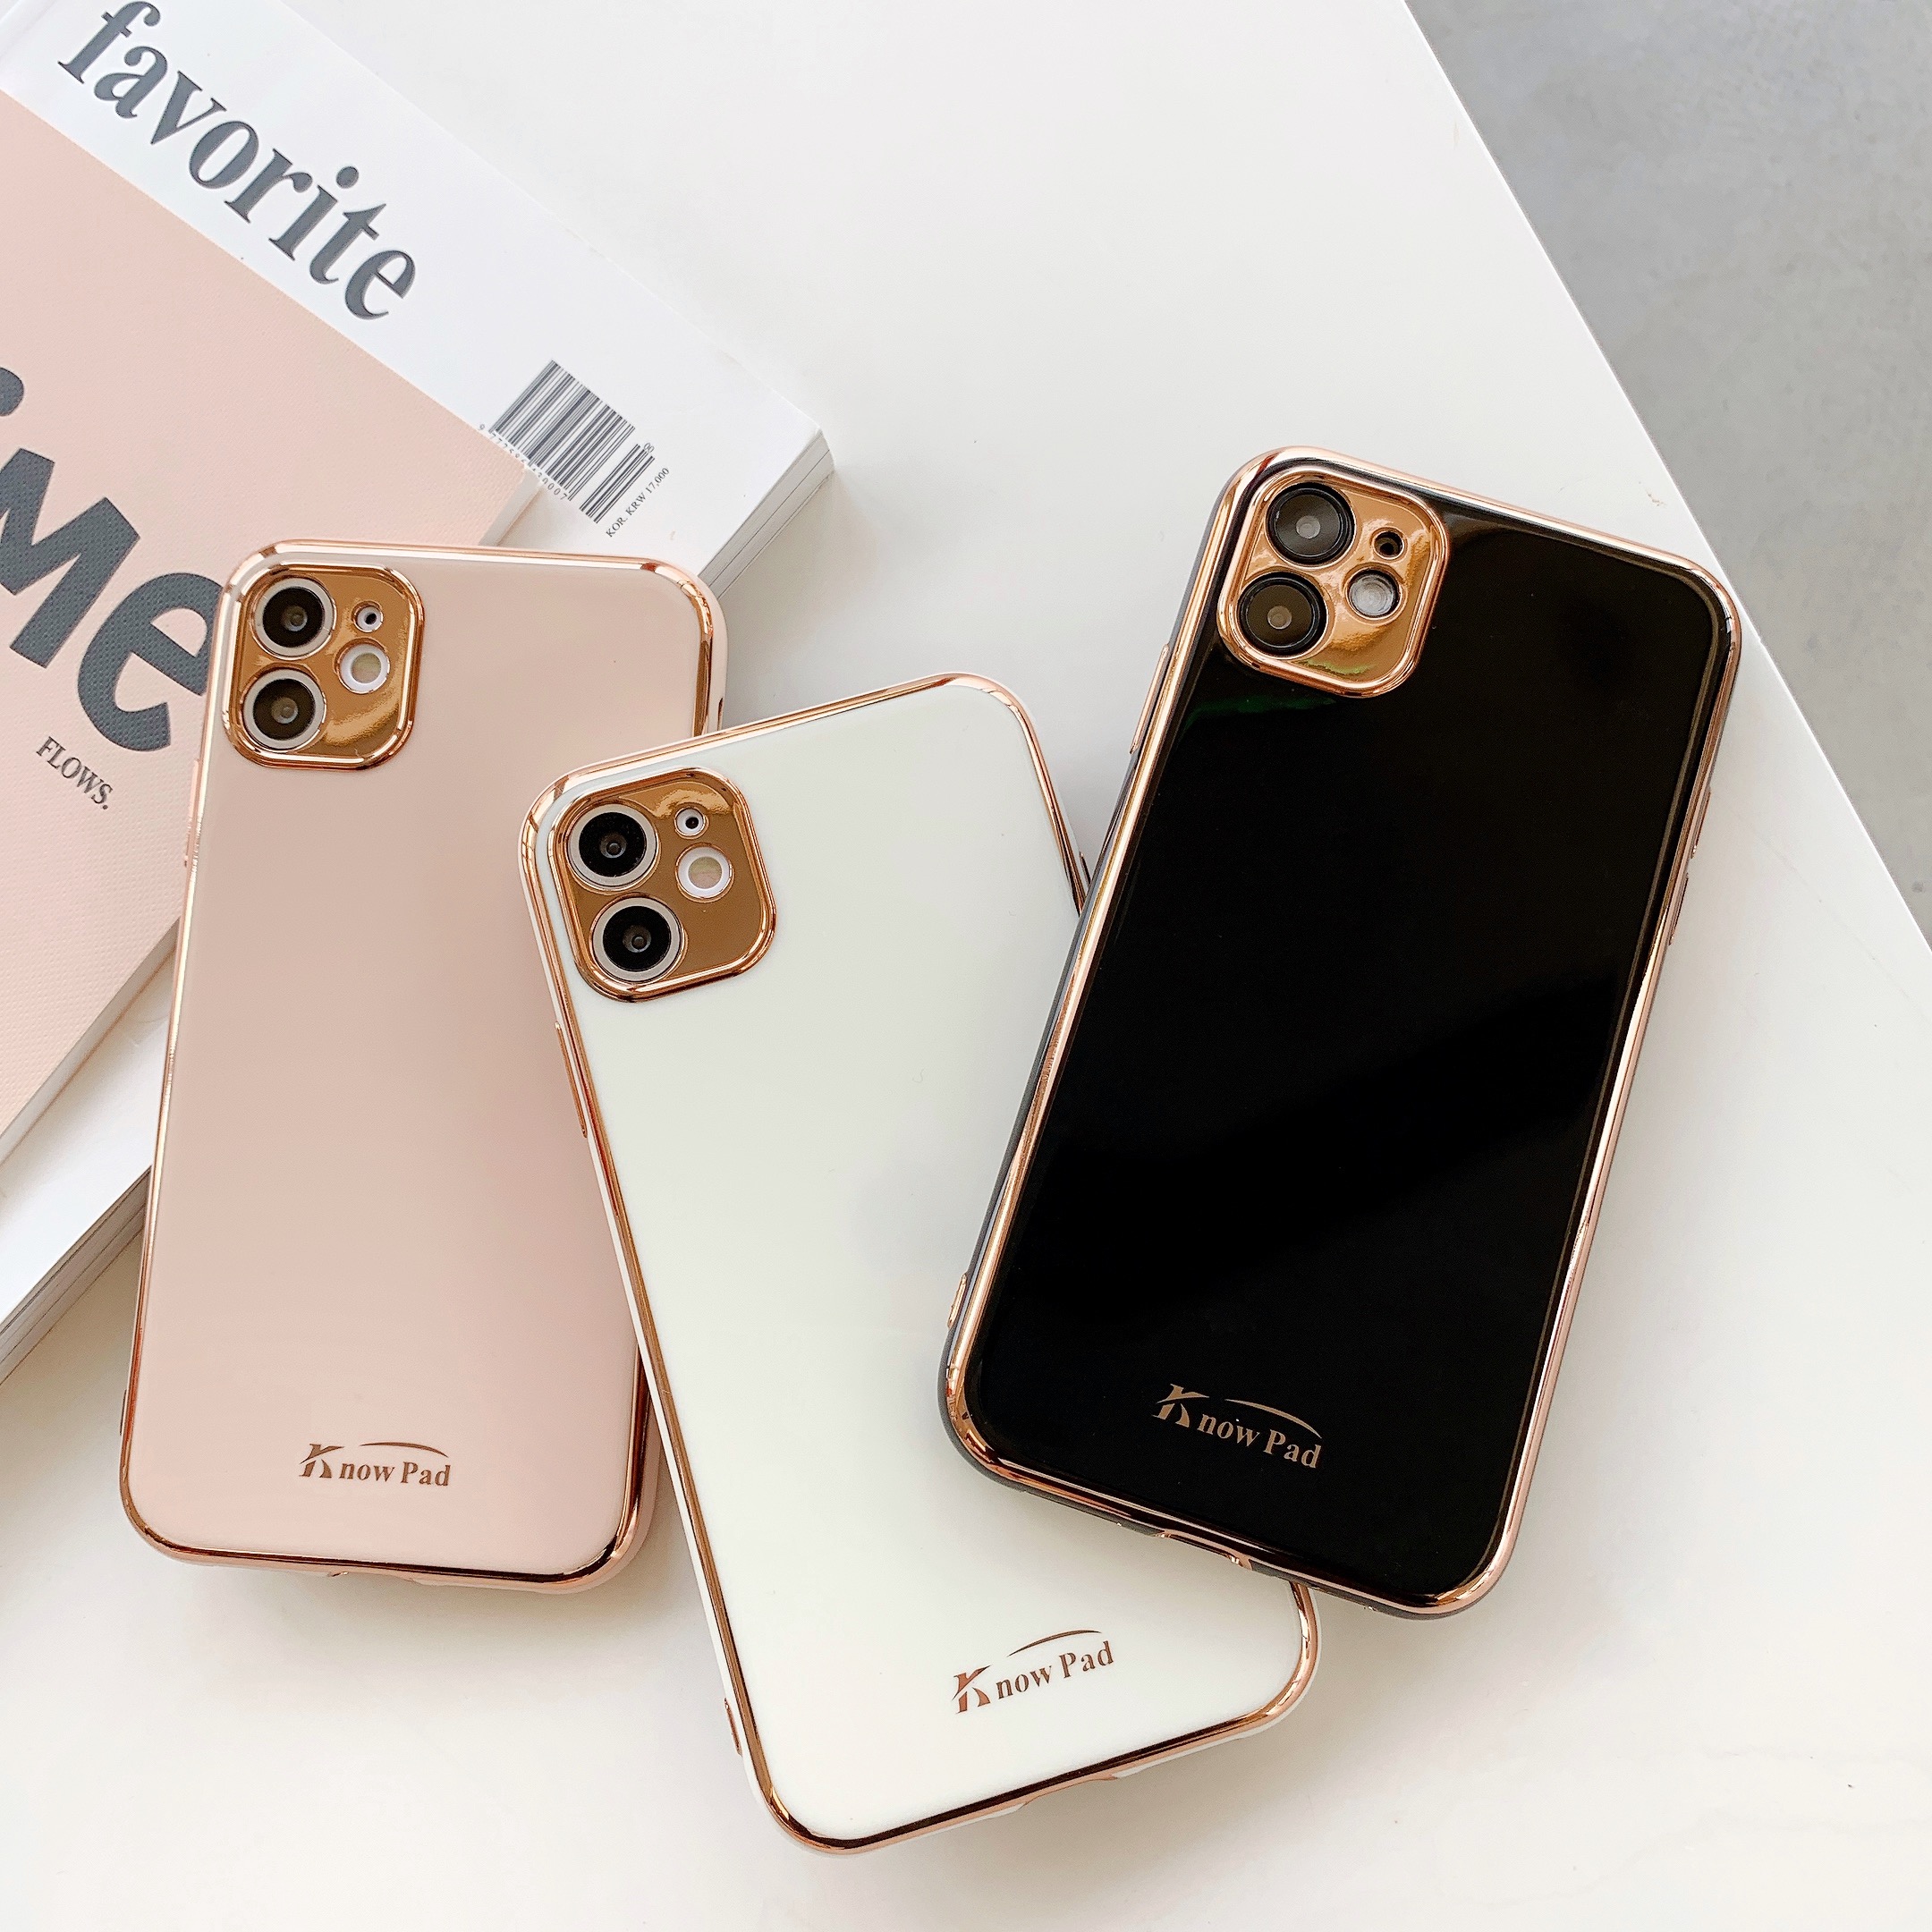 Price history &amp; Review on Luxury Gold Plated Electroplated Case For iPhone  11 12 Mini Pro Max 8 7 Plus XR XS MAX X Silicone Camera Lens Protection  Cover | AliExpress Seller - HALOCASE 3 Store | Alitools.io